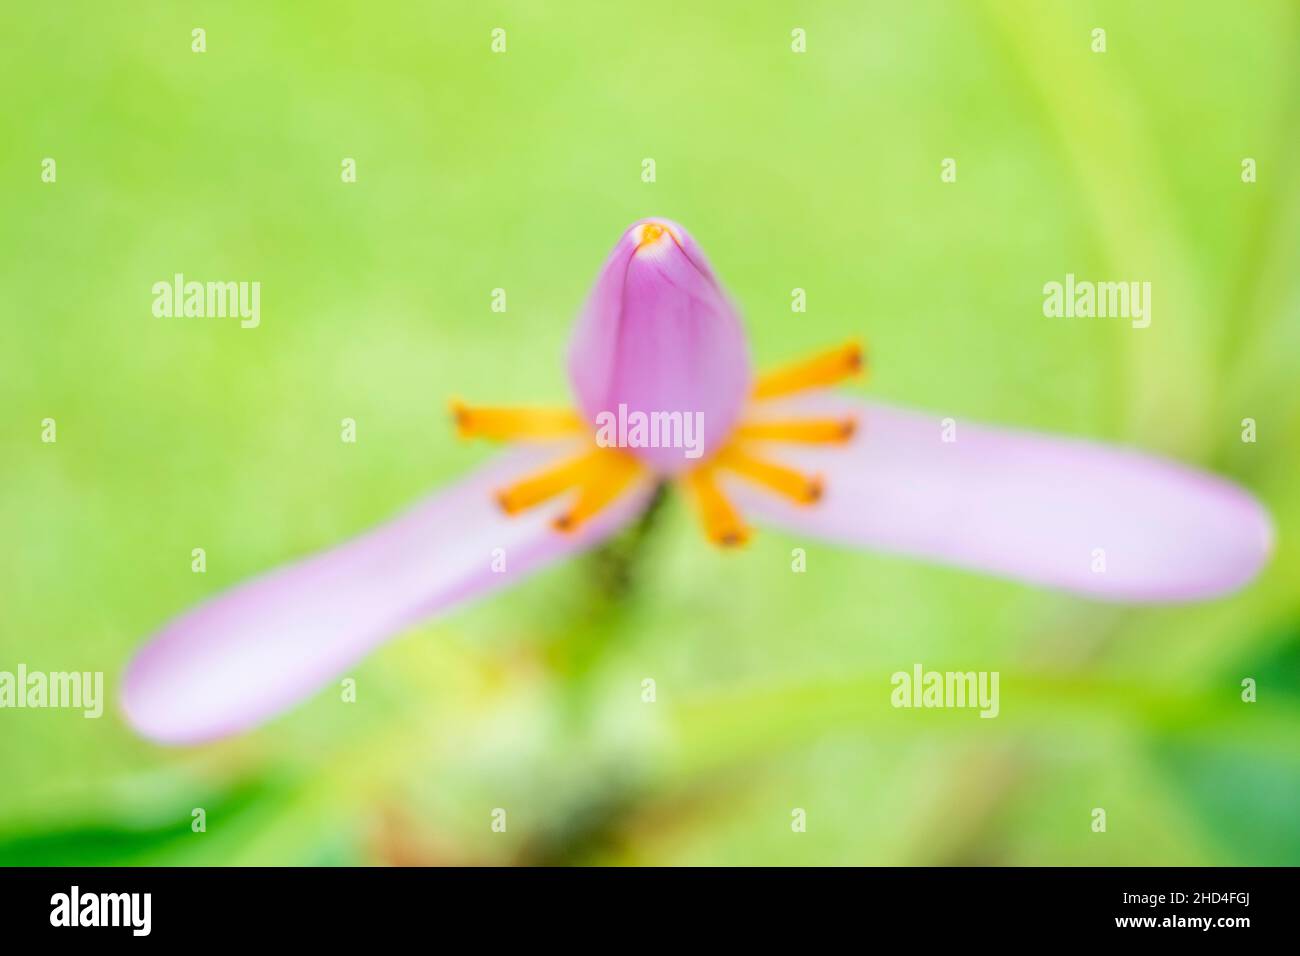 Selective focus shot of a purple false banana flower on a stem with a green blurry background Stock Photo